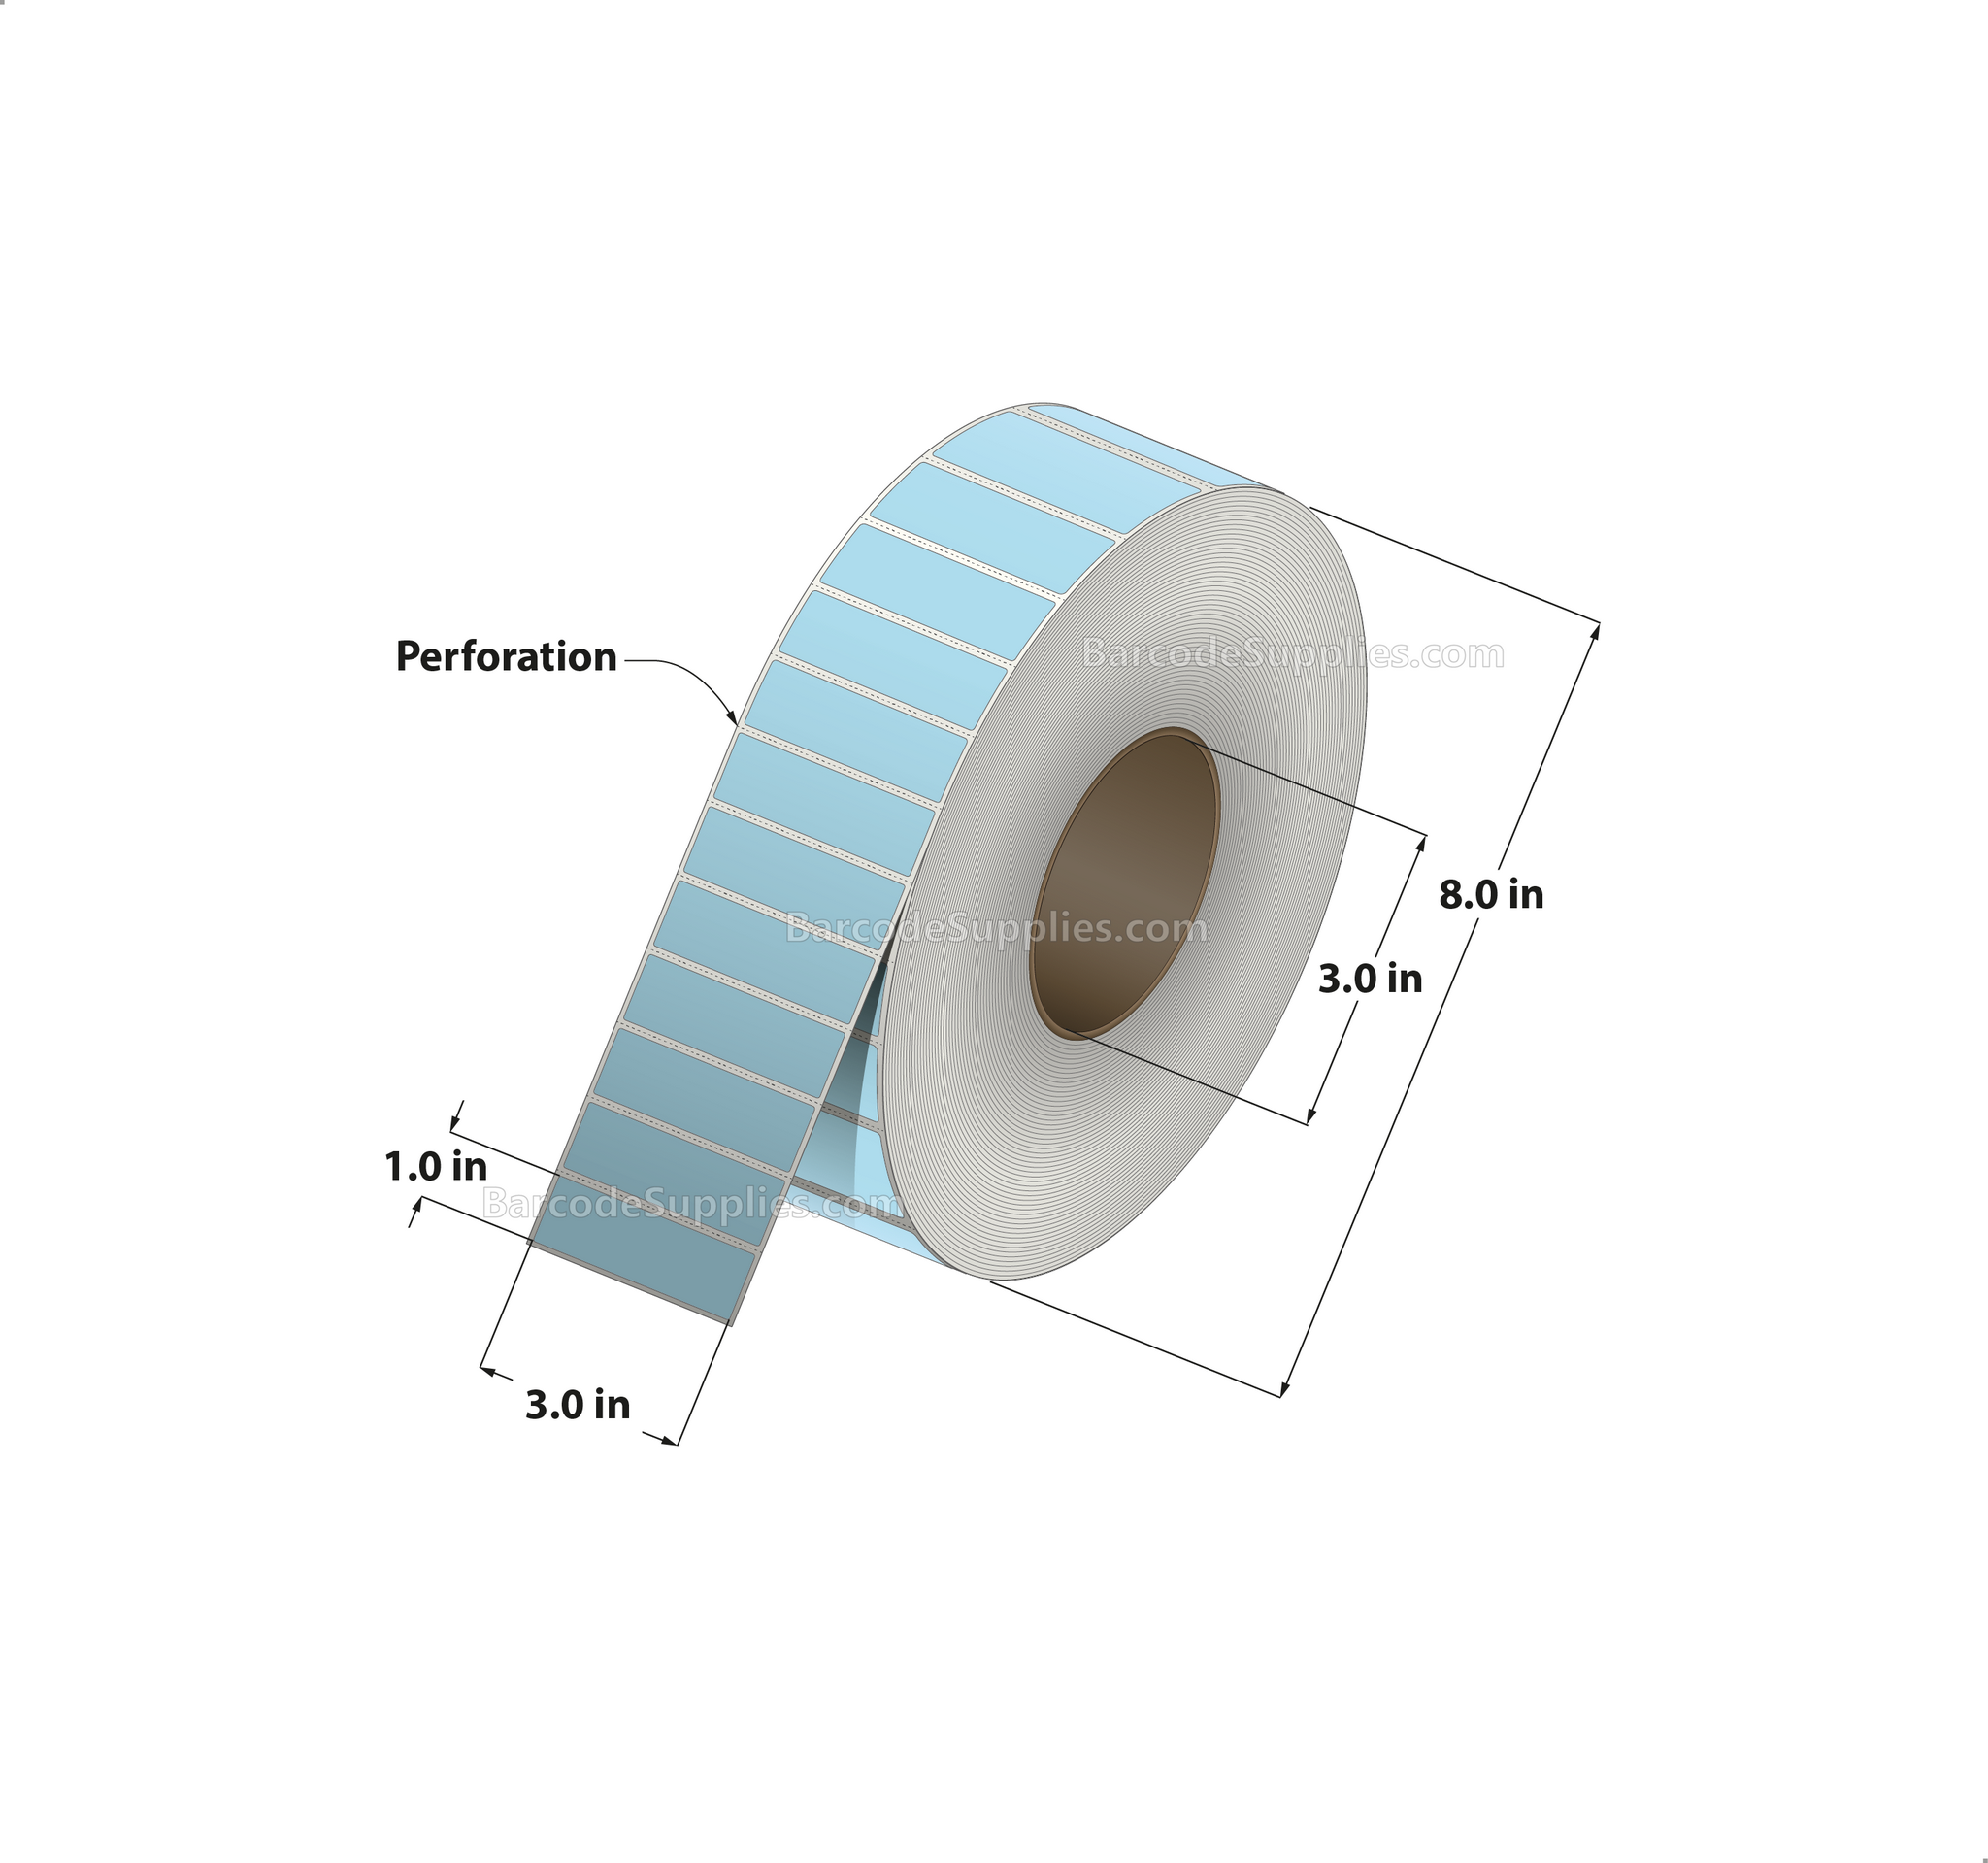 3 x 1 Thermal Transfer 290 Blue Labels With Permanent Adhesive - Perforated - 5500 Labels Per Roll - Carton Of 8 Rolls - 44000 Labels Total - MPN: RFC-3-1-5500-BL